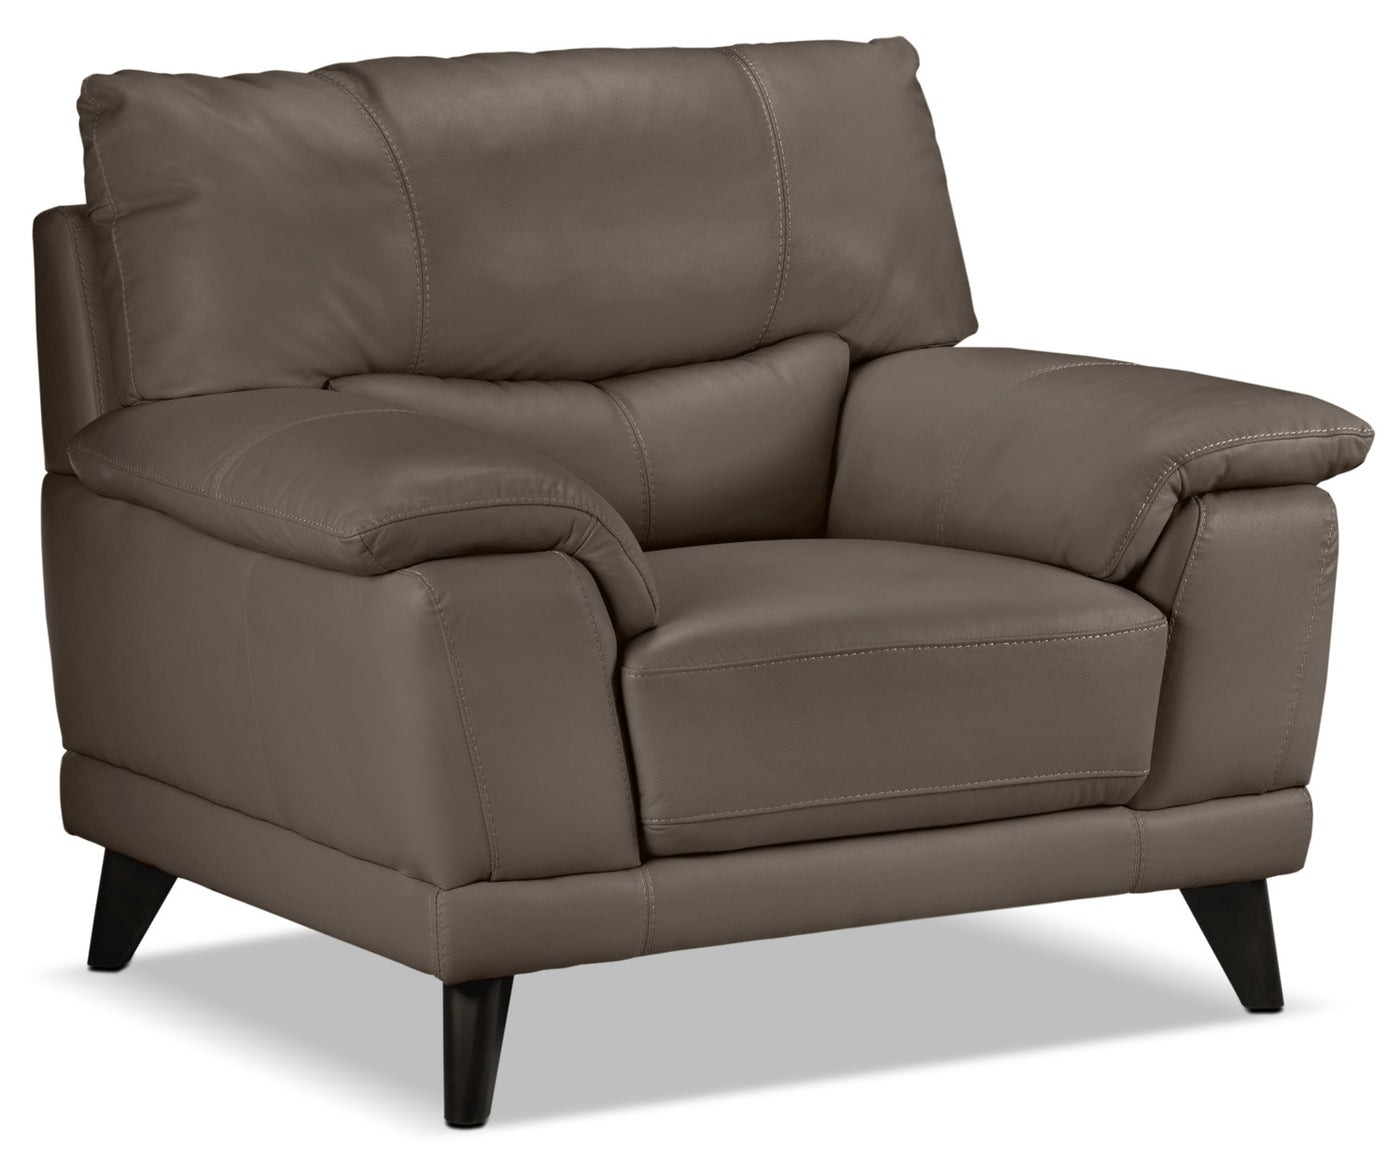 Braylon Leather Sofa, Loveseat and Chair Set - African Grey